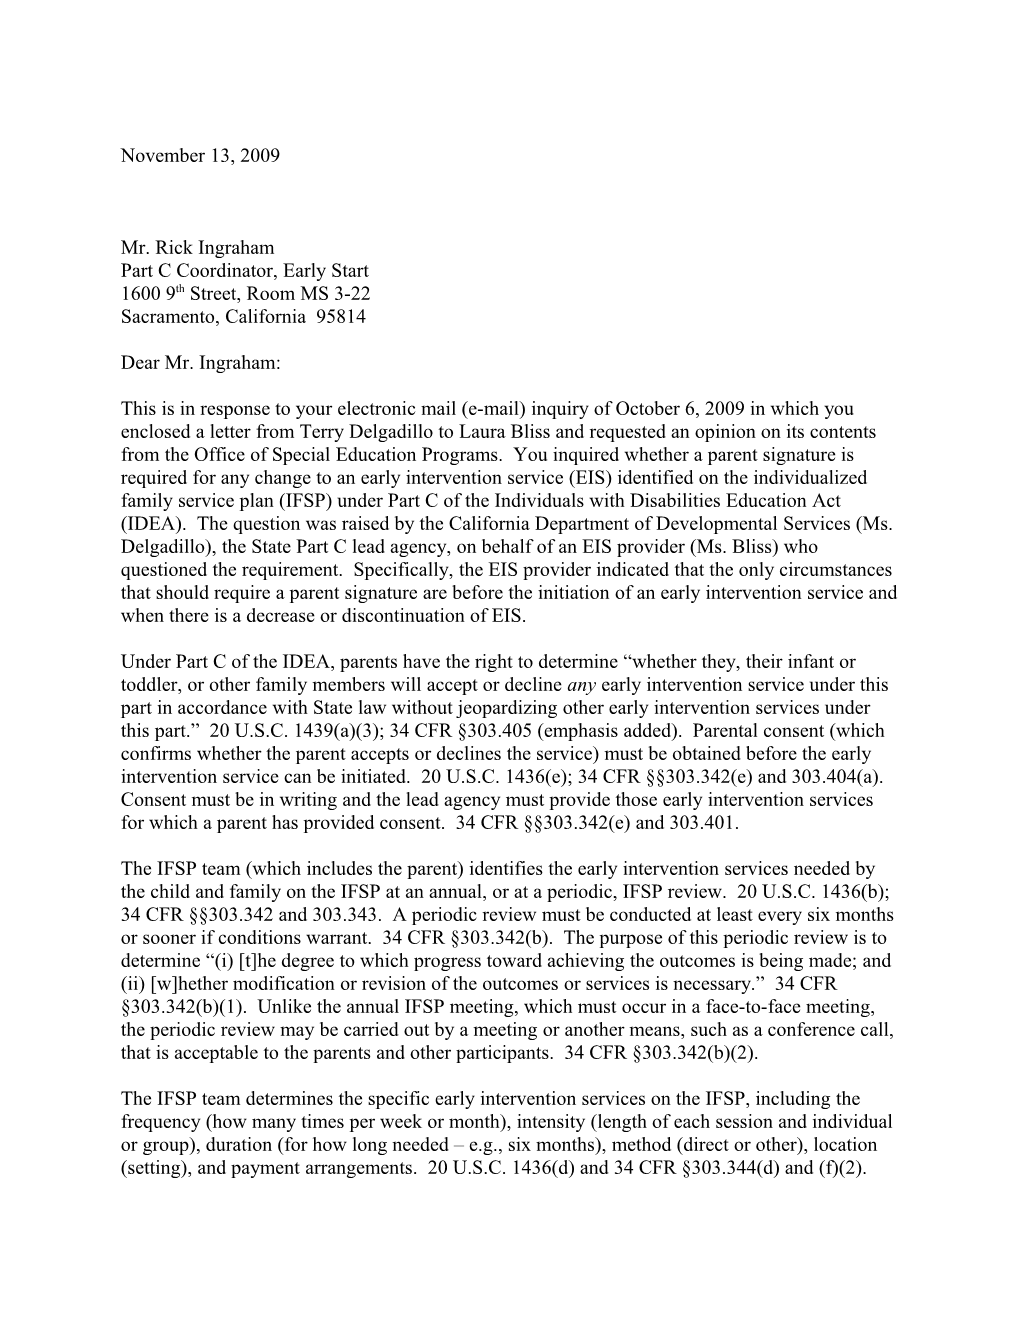 Ingraham Letter Dated 11/13/09 Re: Parental Consent (Ms Word)